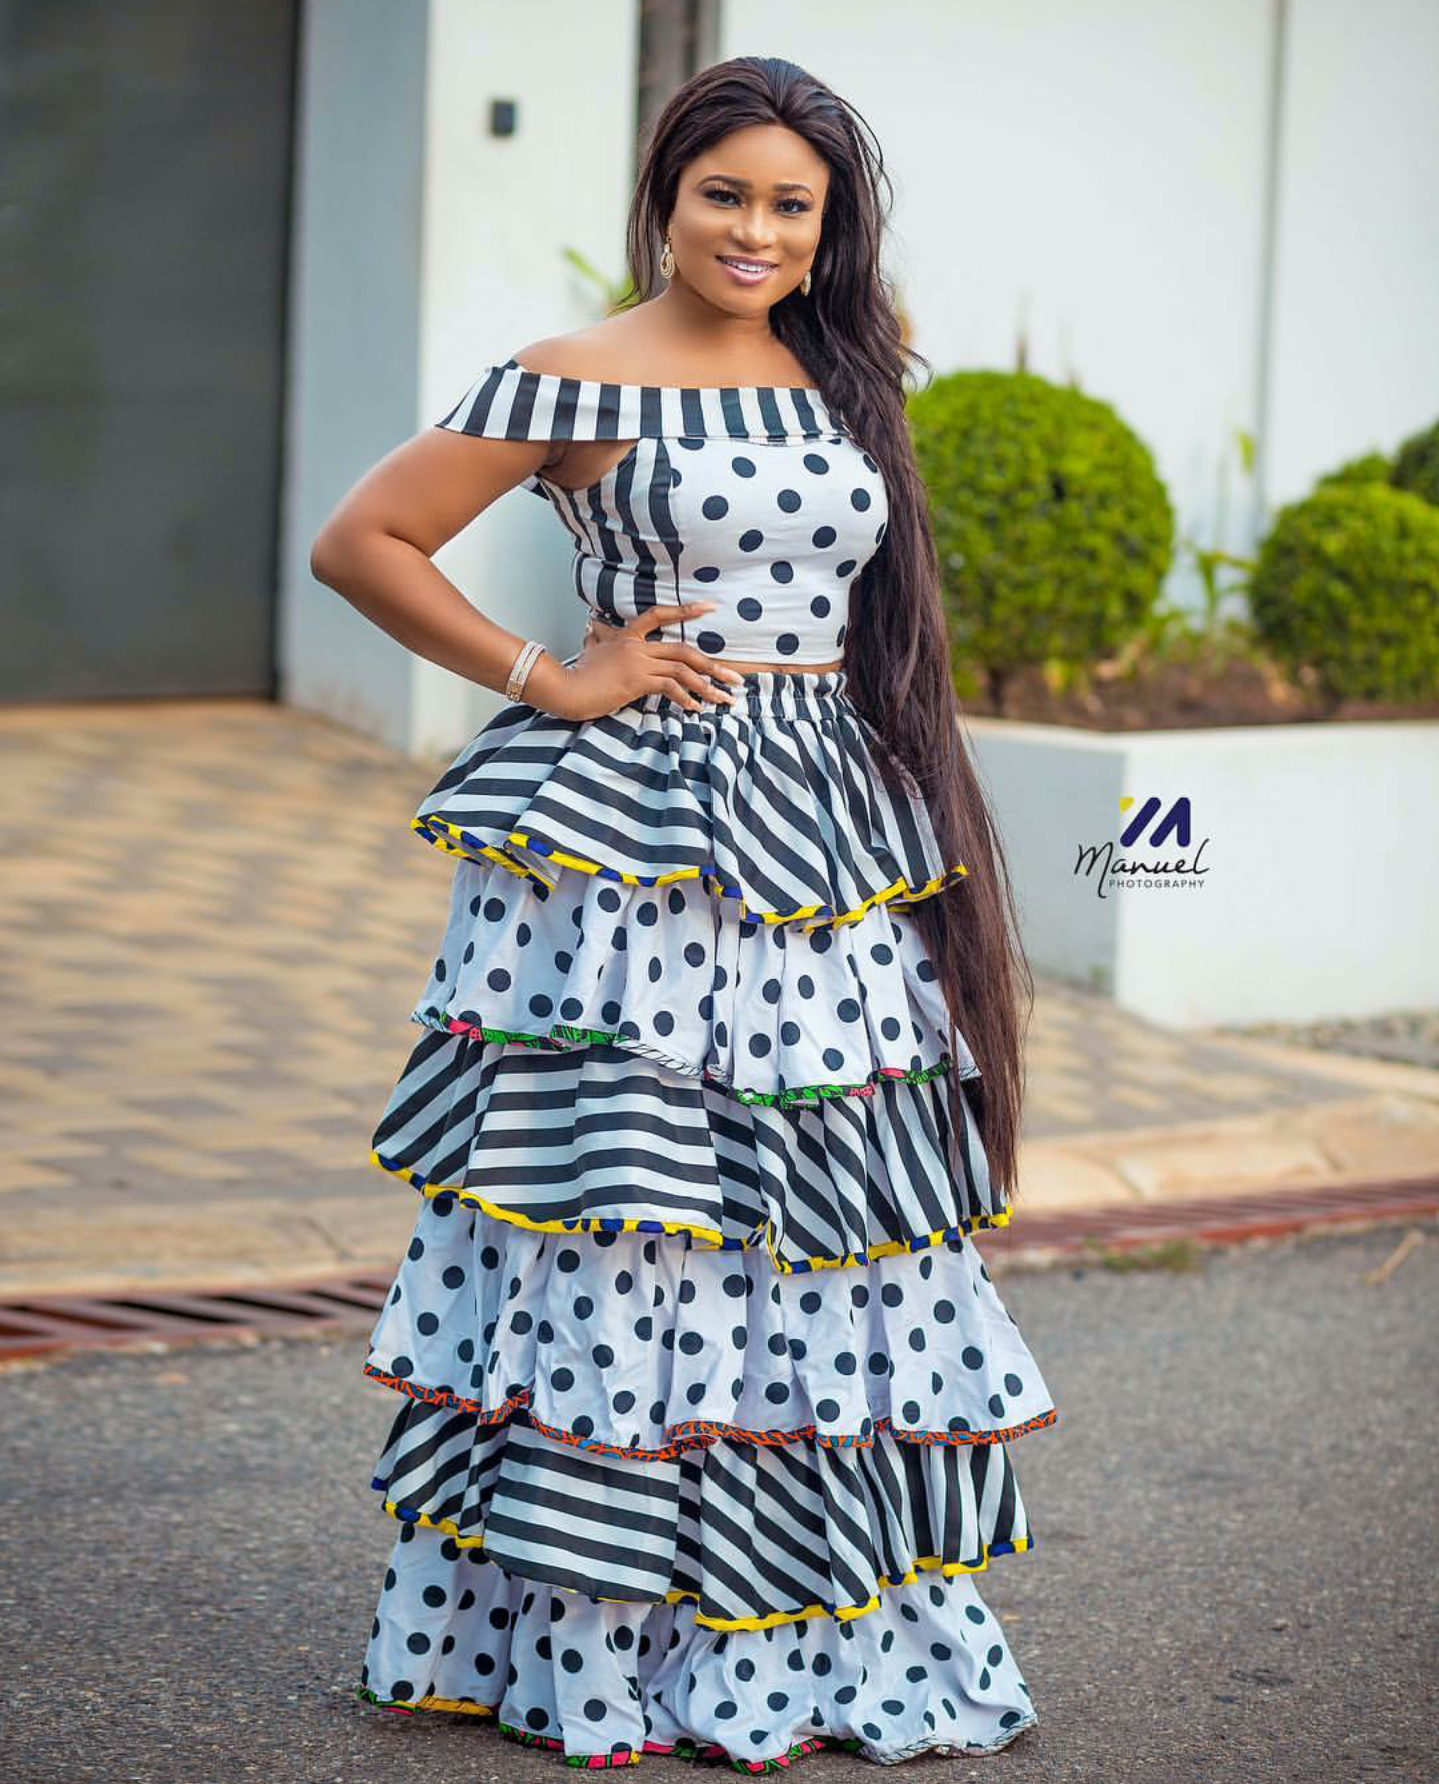 Christabel Ekeh served style goals in this two piece polka dots and stripes top and raffled skirt